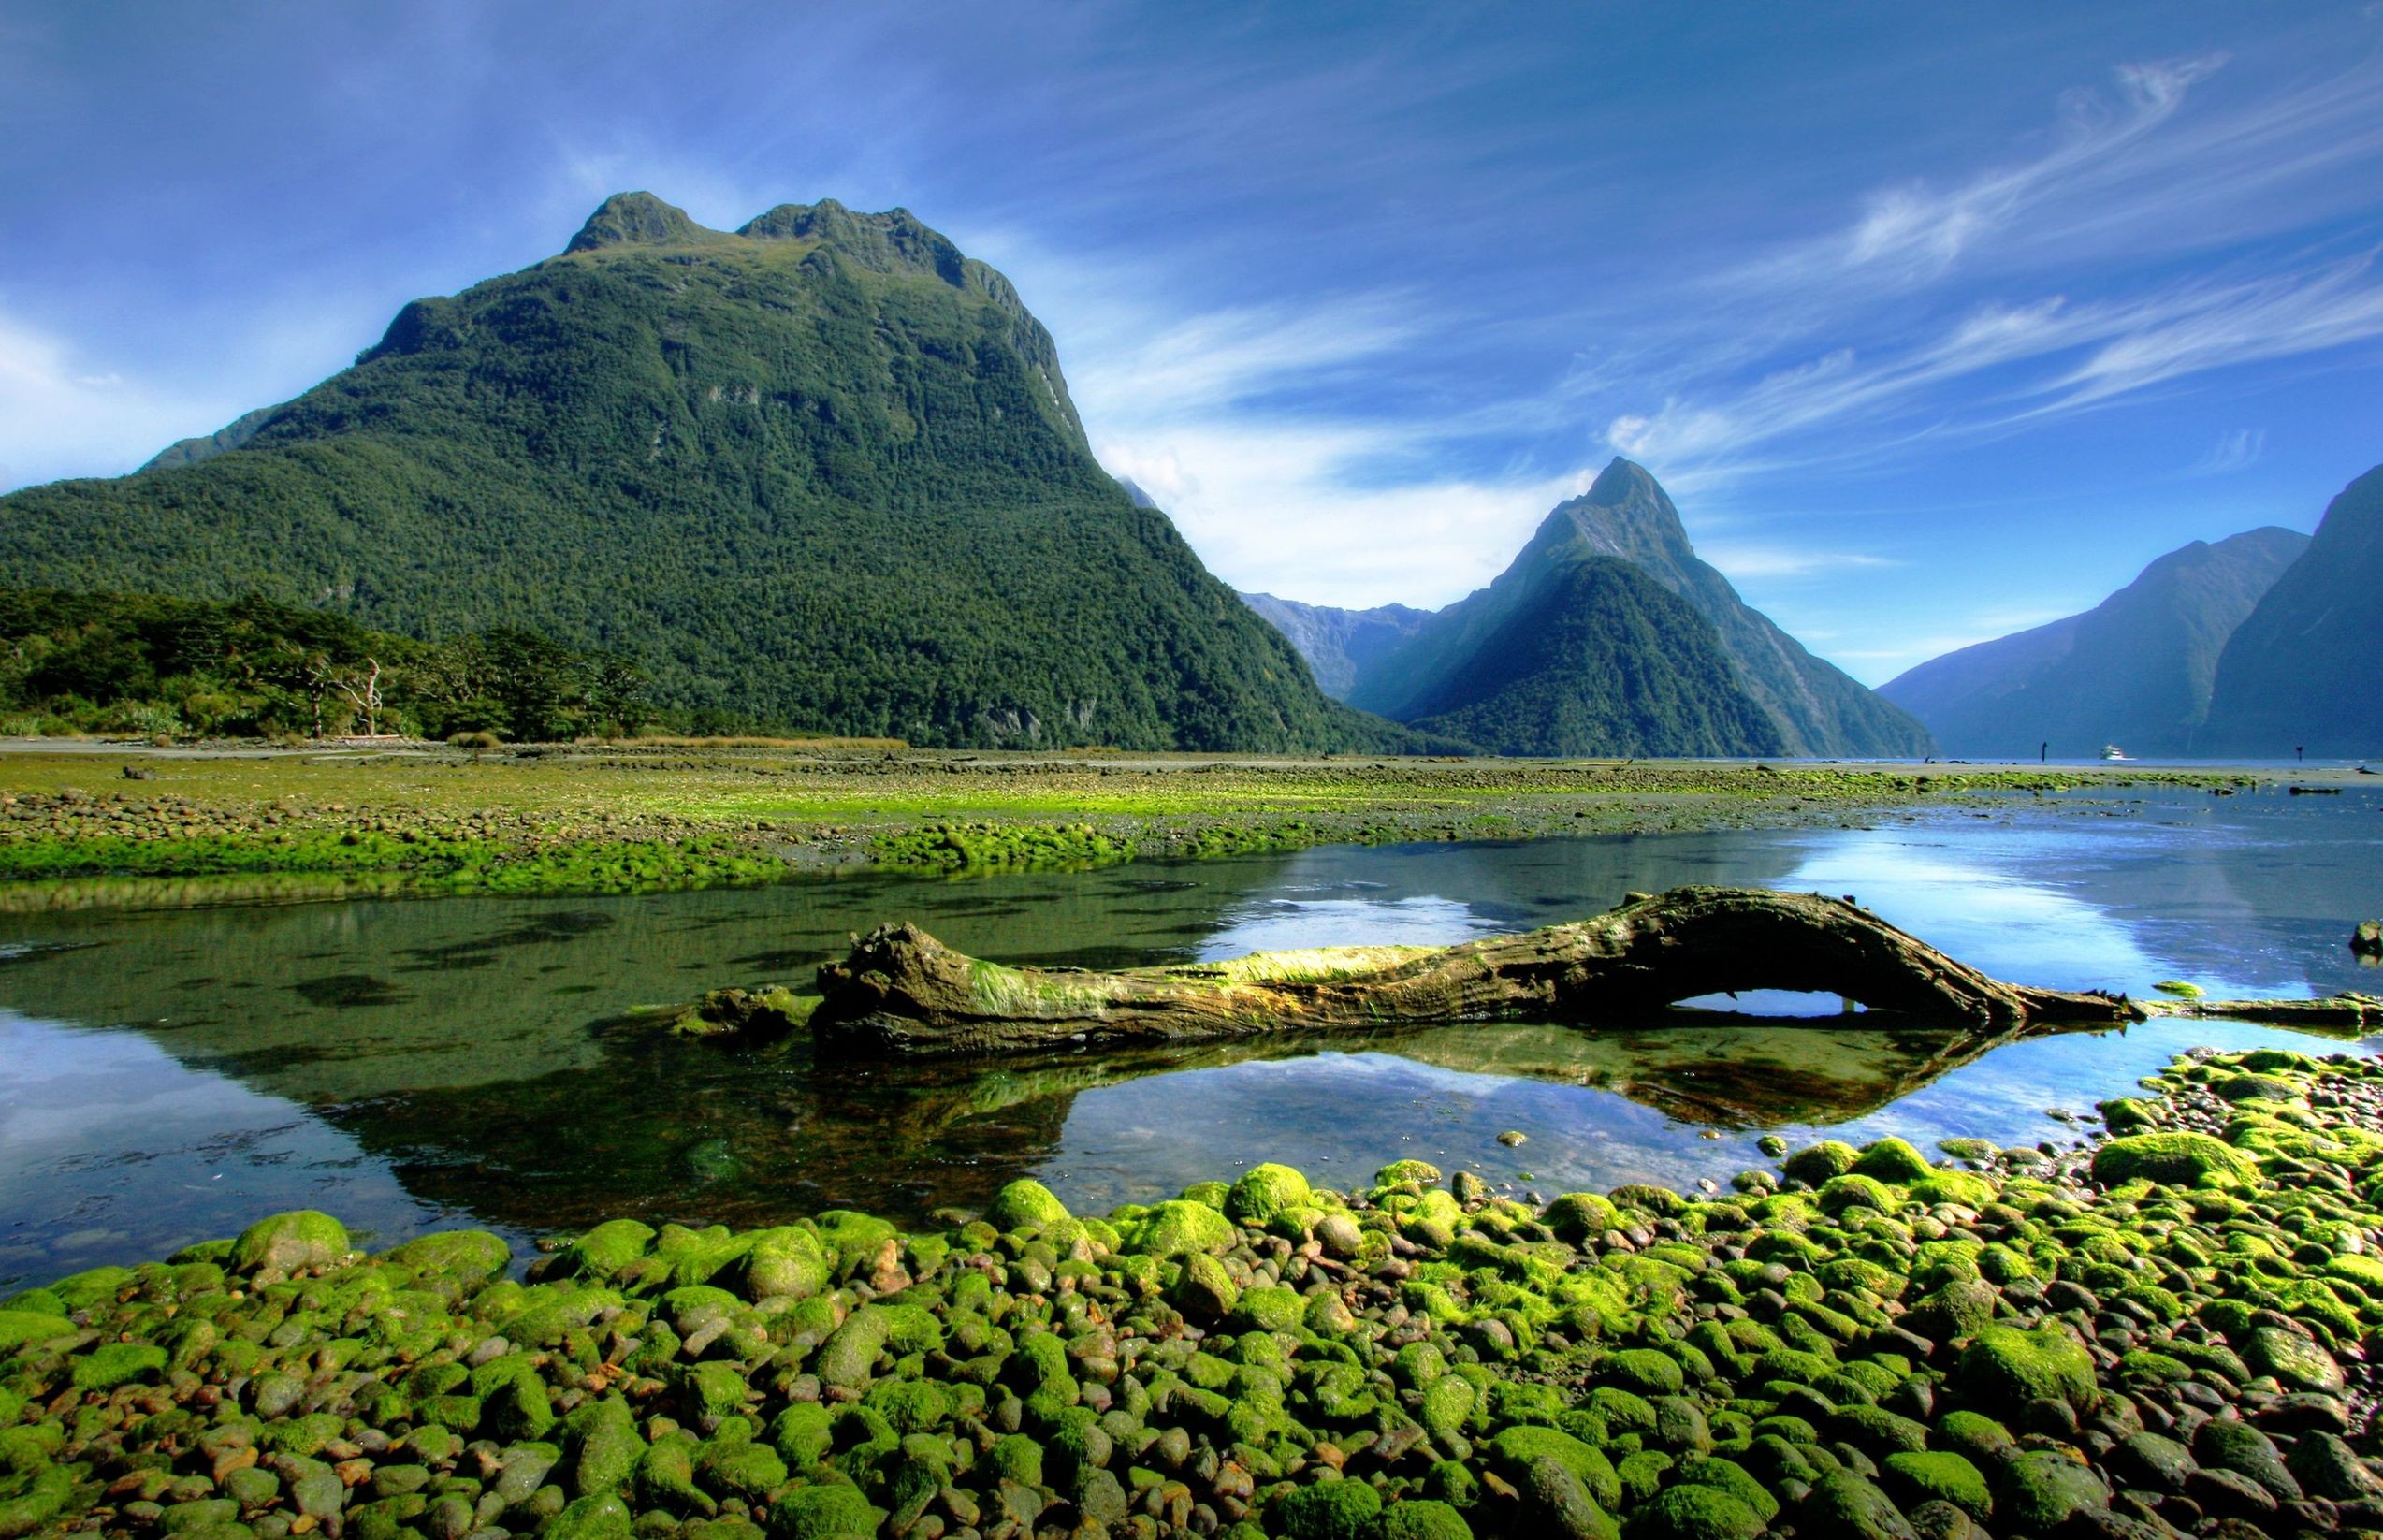 General 2547x1646 landscape photography nature mountains moss Milford Sound fjord national park New Zealand Fiordland National Park